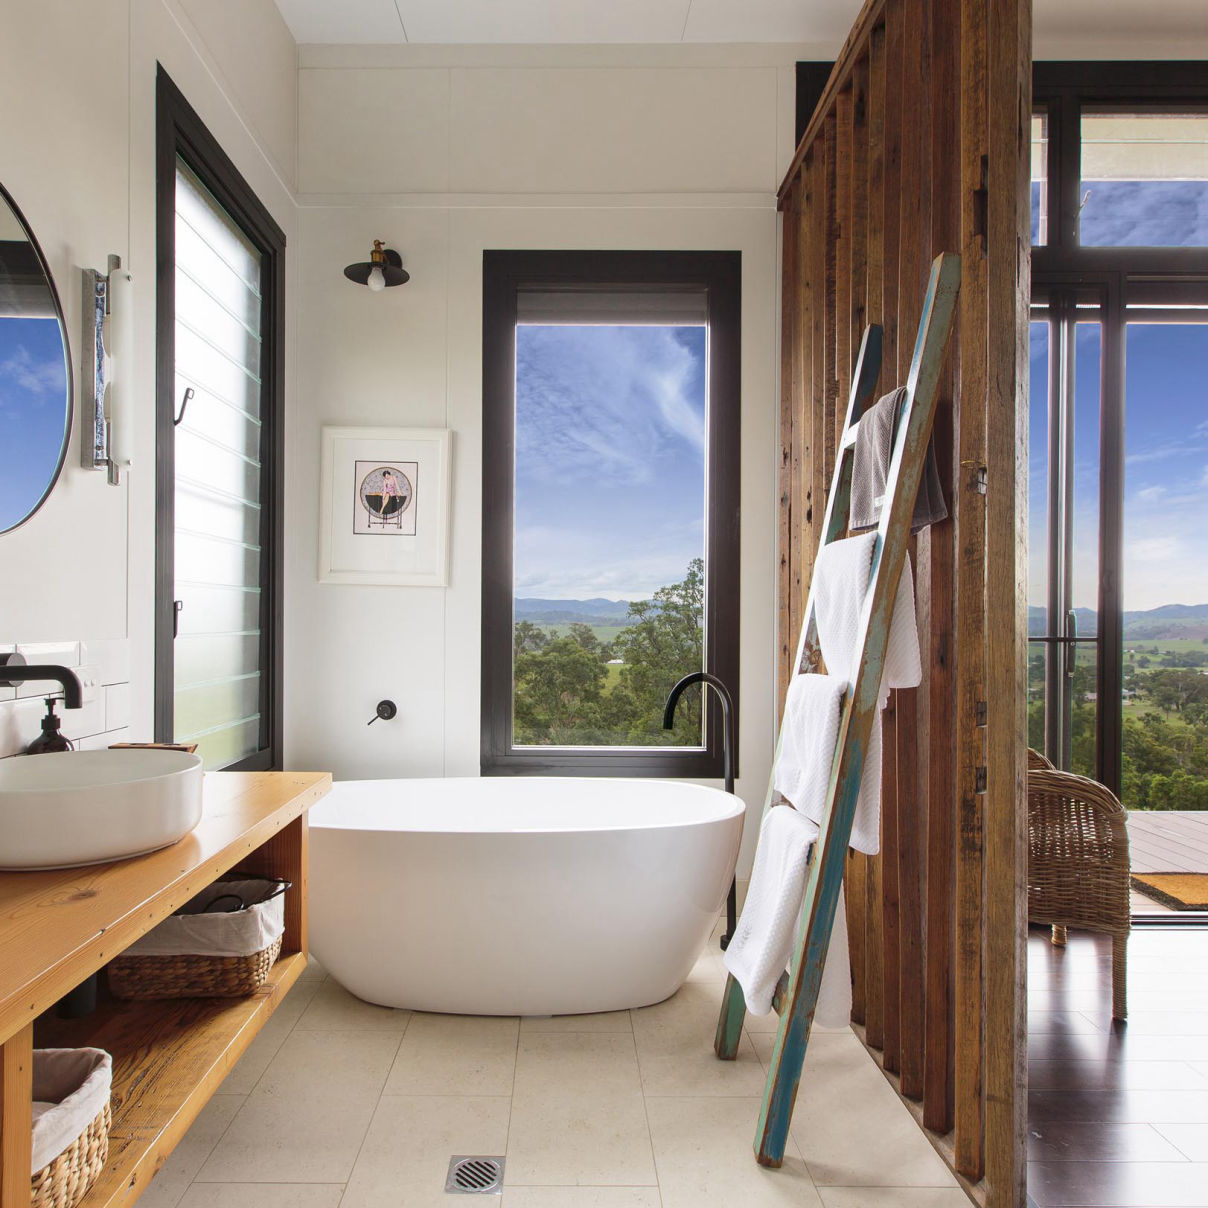 This MAAP House bathroom contains a freestanding bathtub with feature timber screen and recycled towel ladder